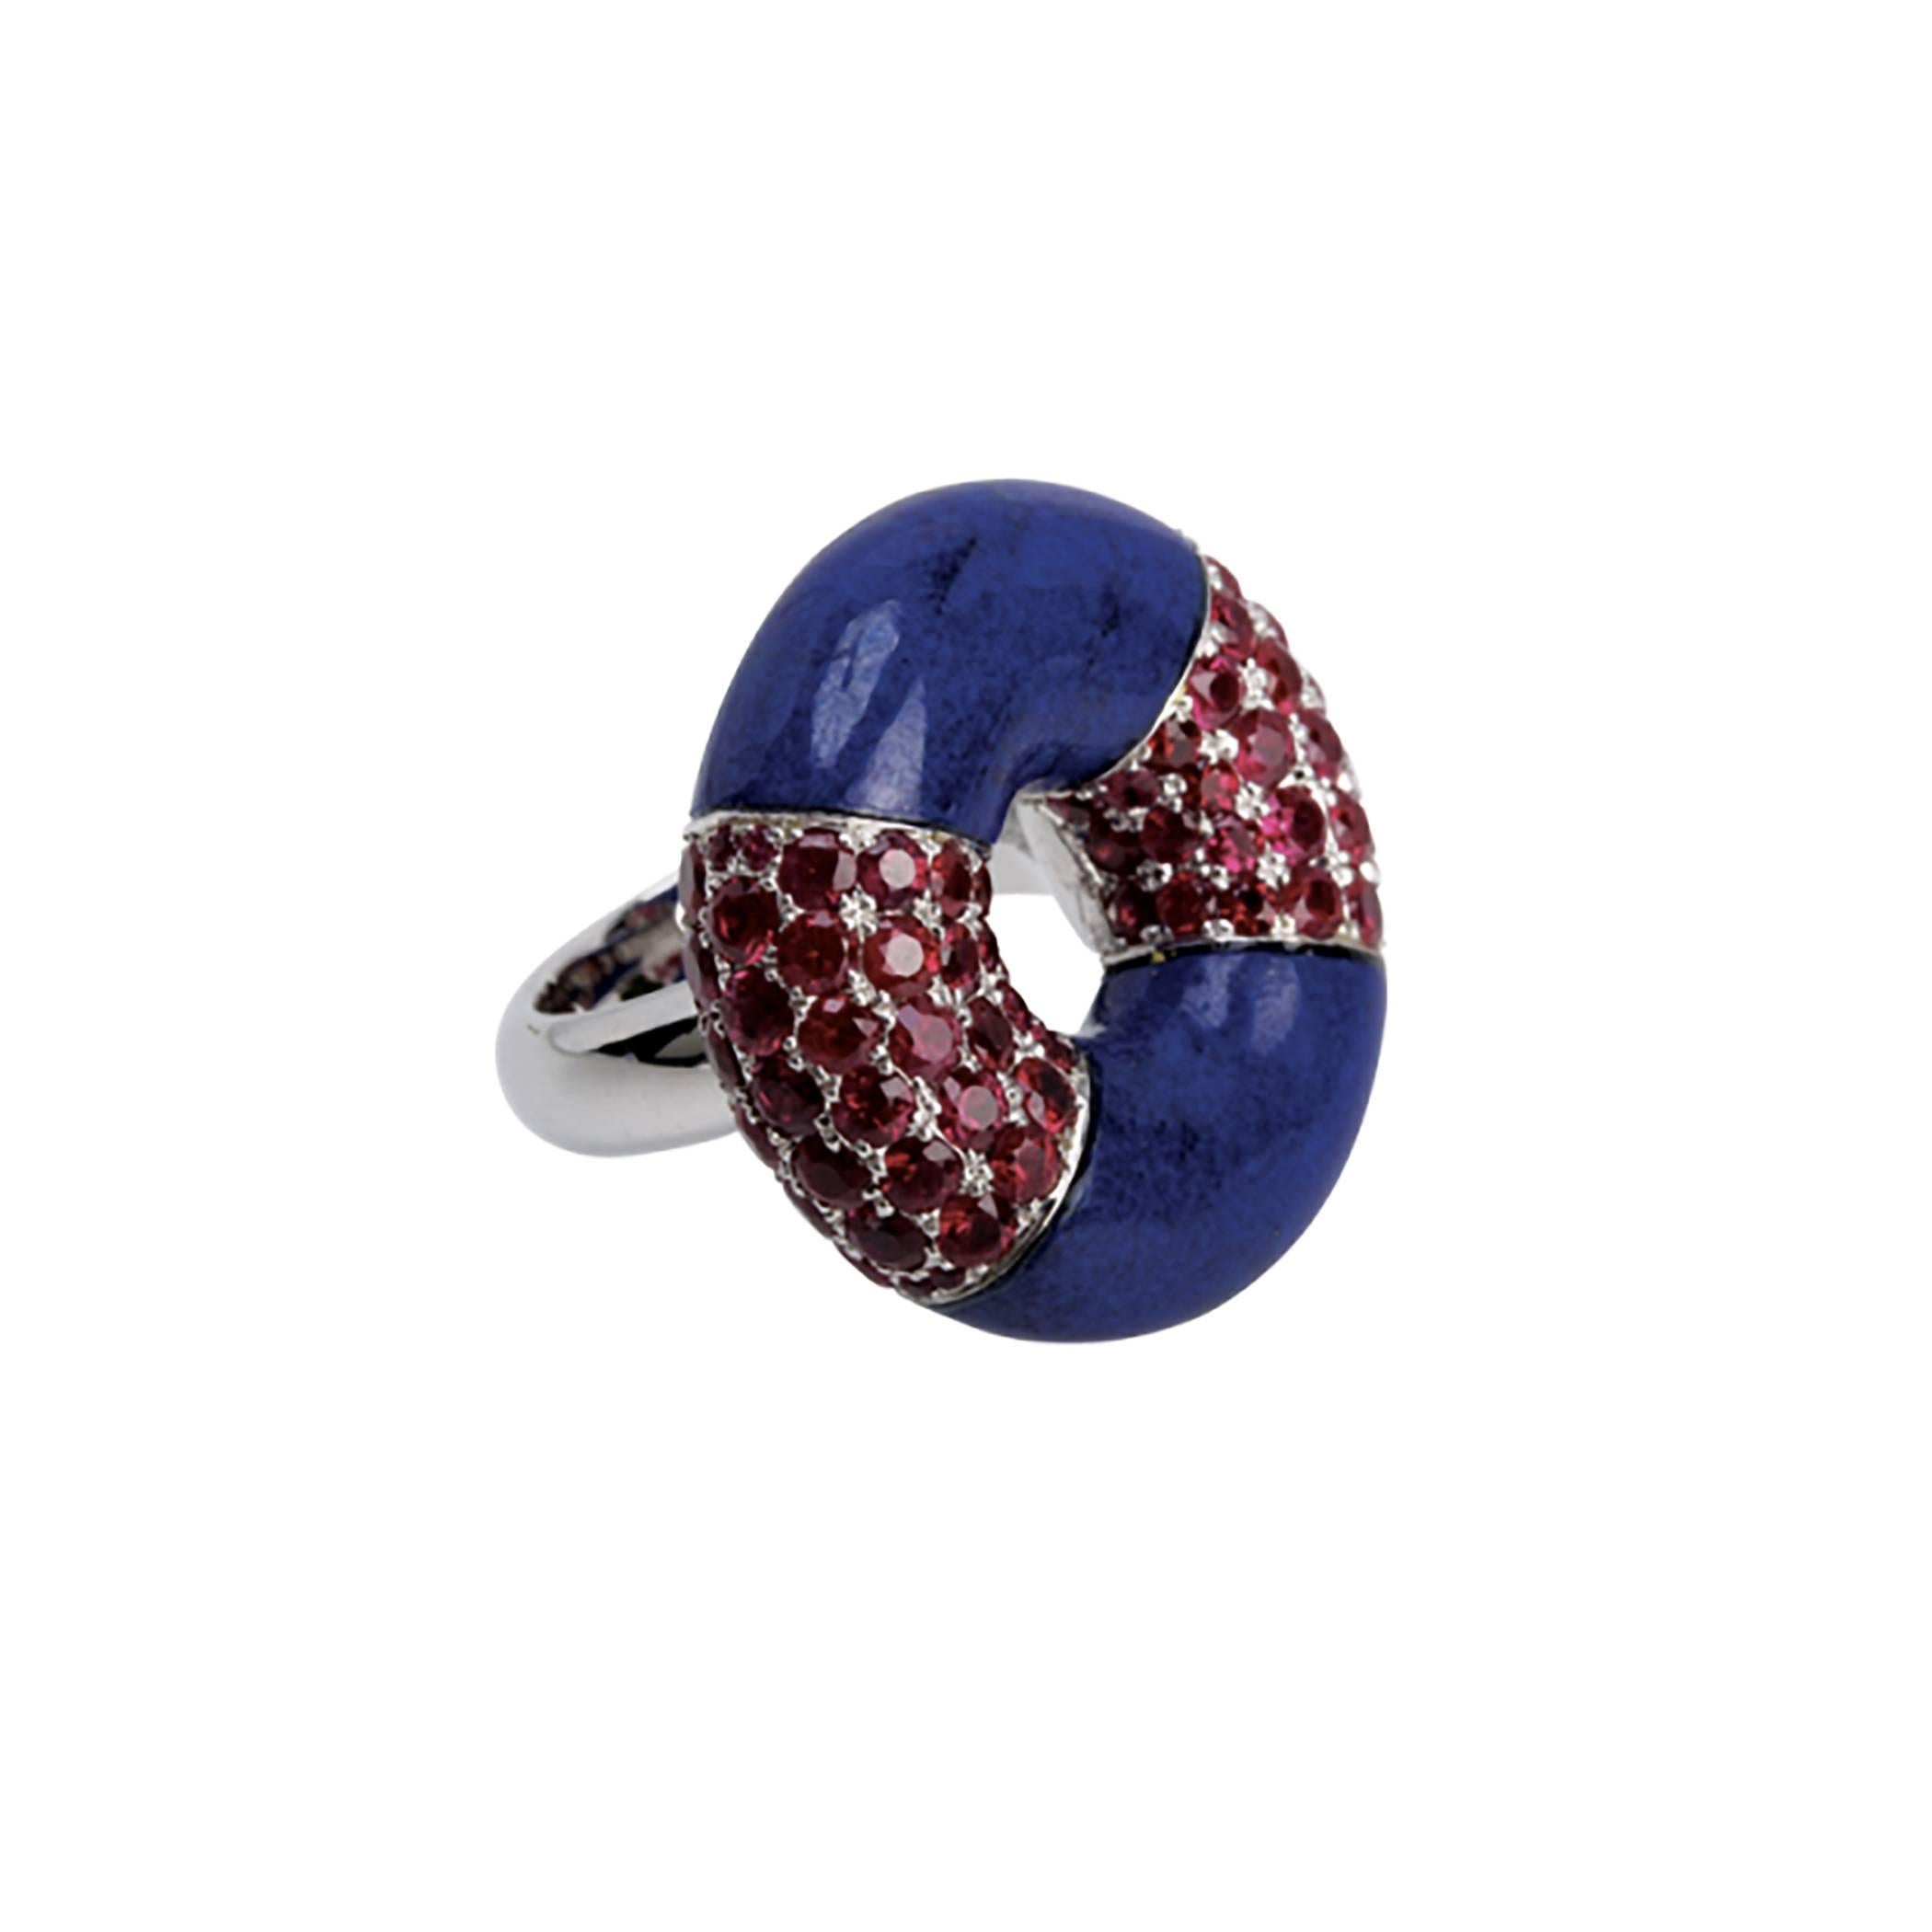 Youmna Fine Jewellery 18 Karat White Gold with Lapis and Rubies Cocktail Ring For Sale